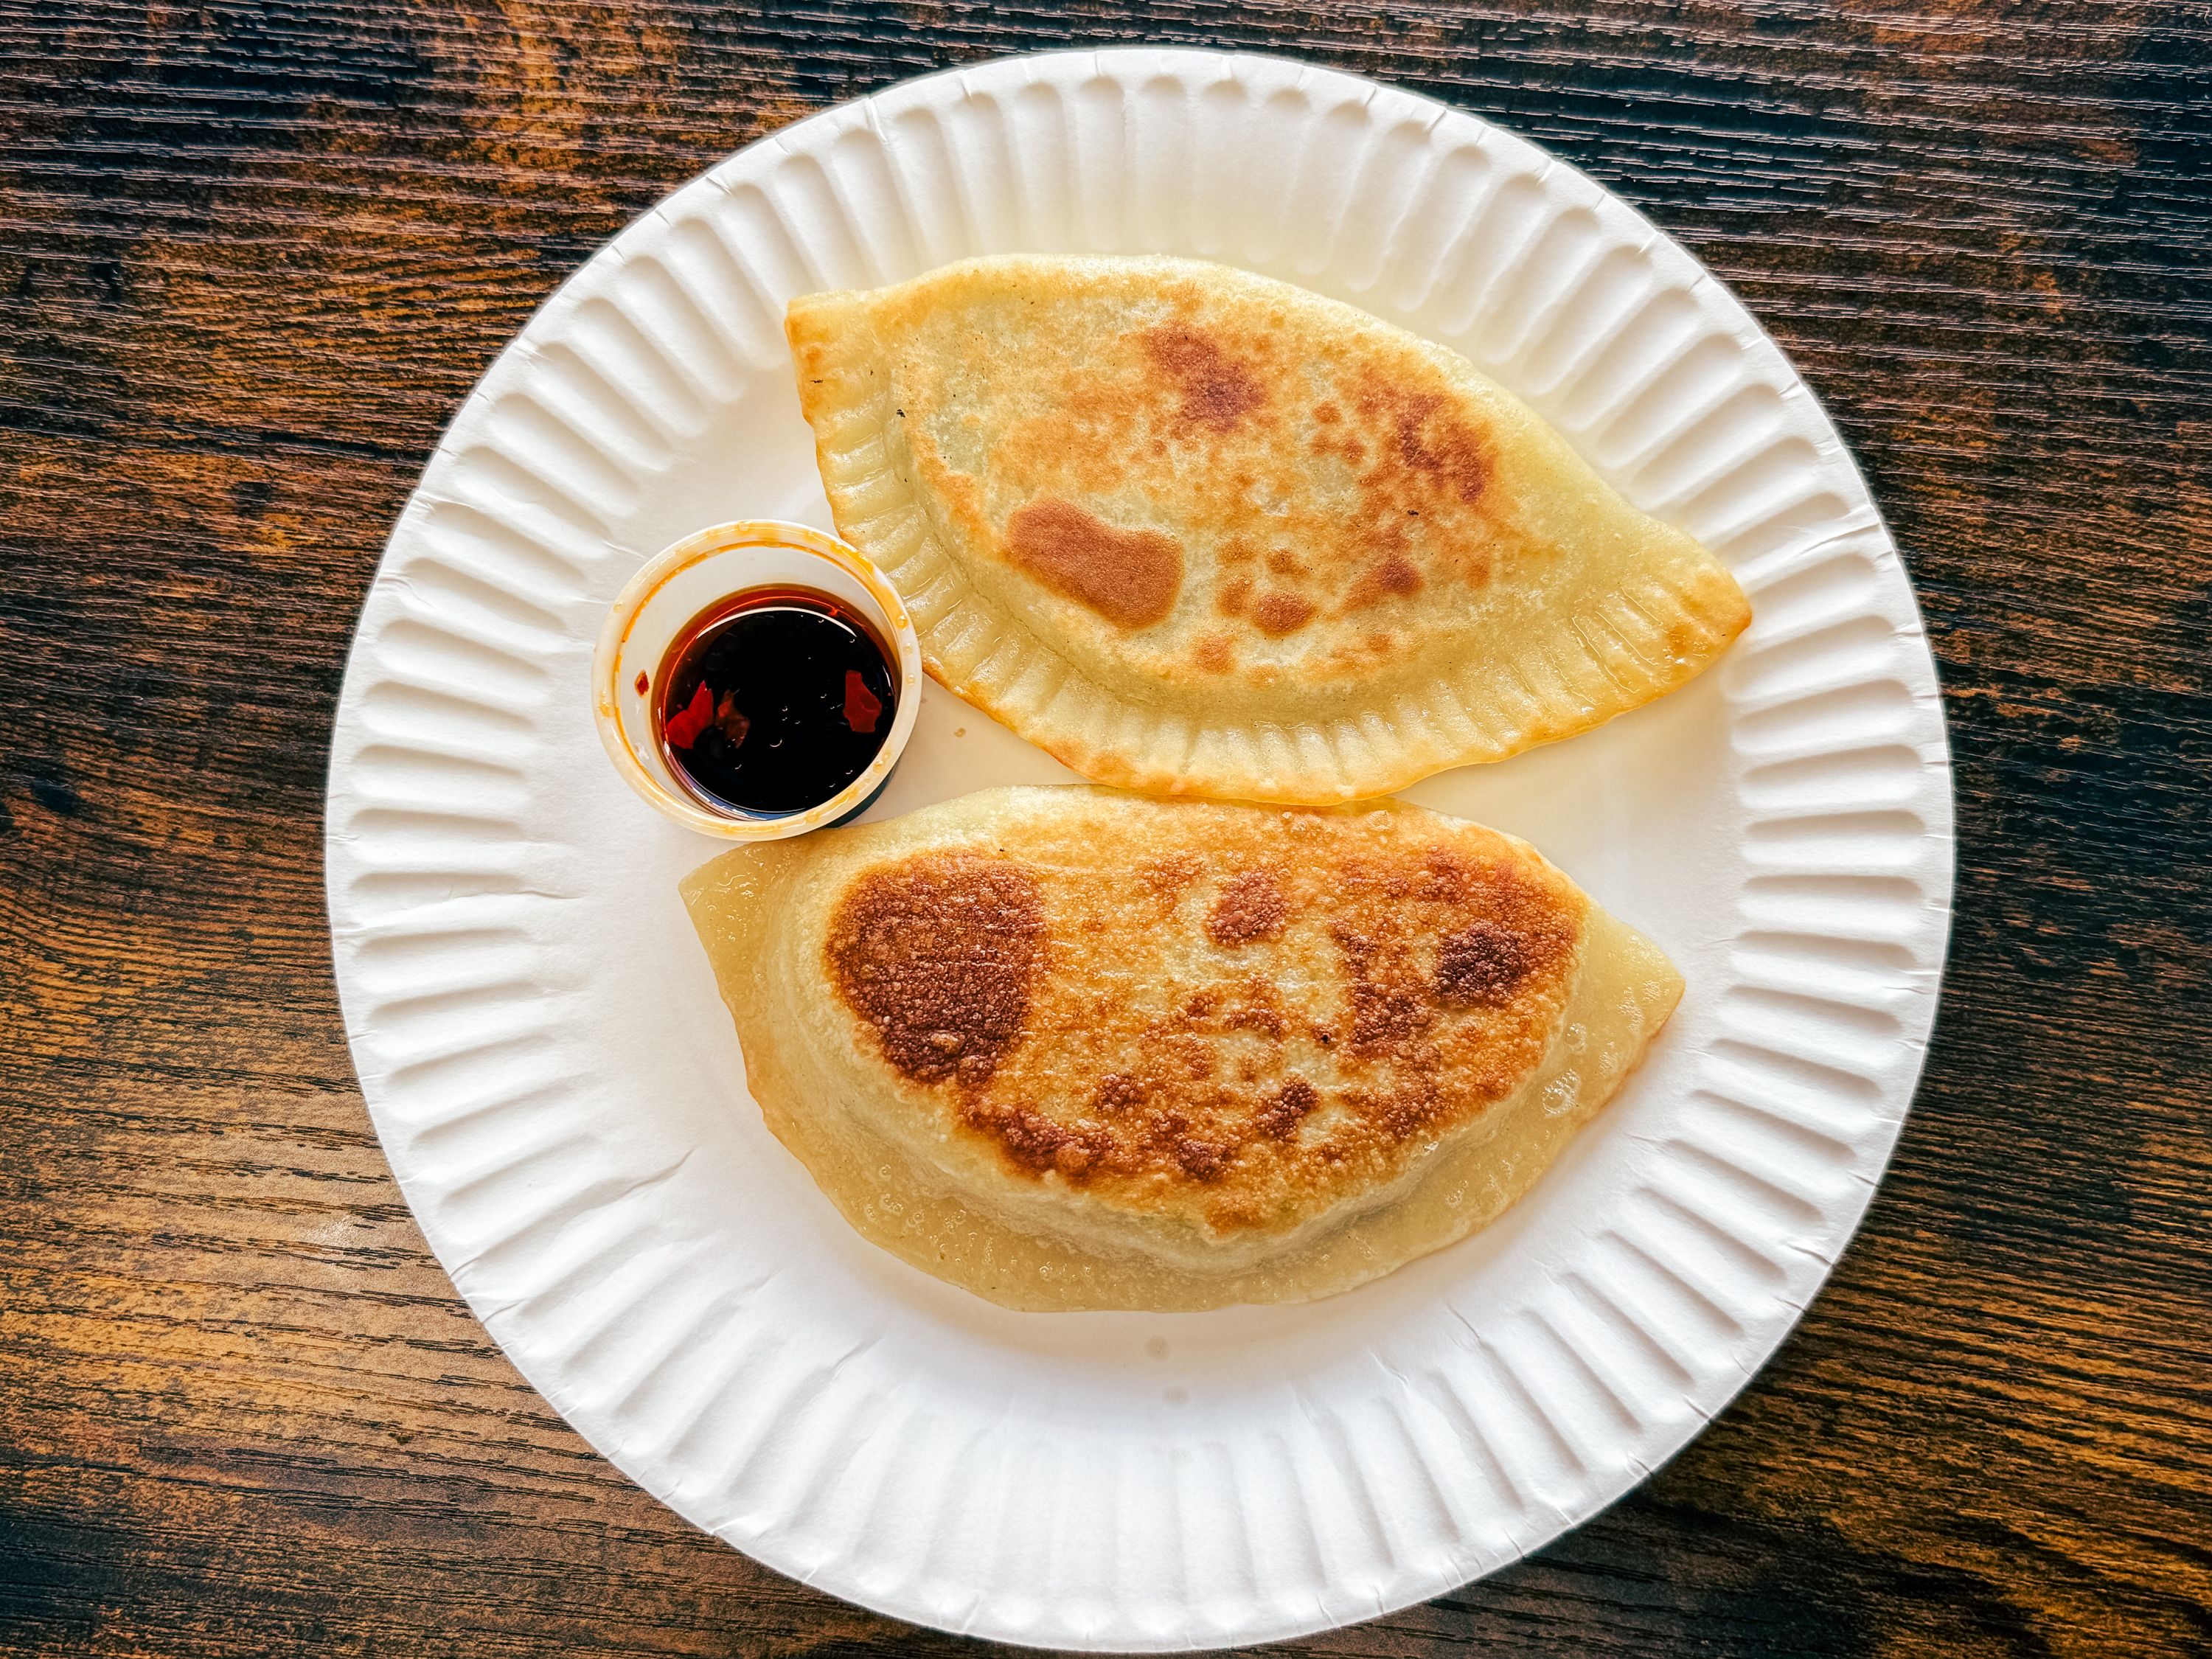 Two golden-brown fried dumplings on a paper plate with a side of dipping sauce.